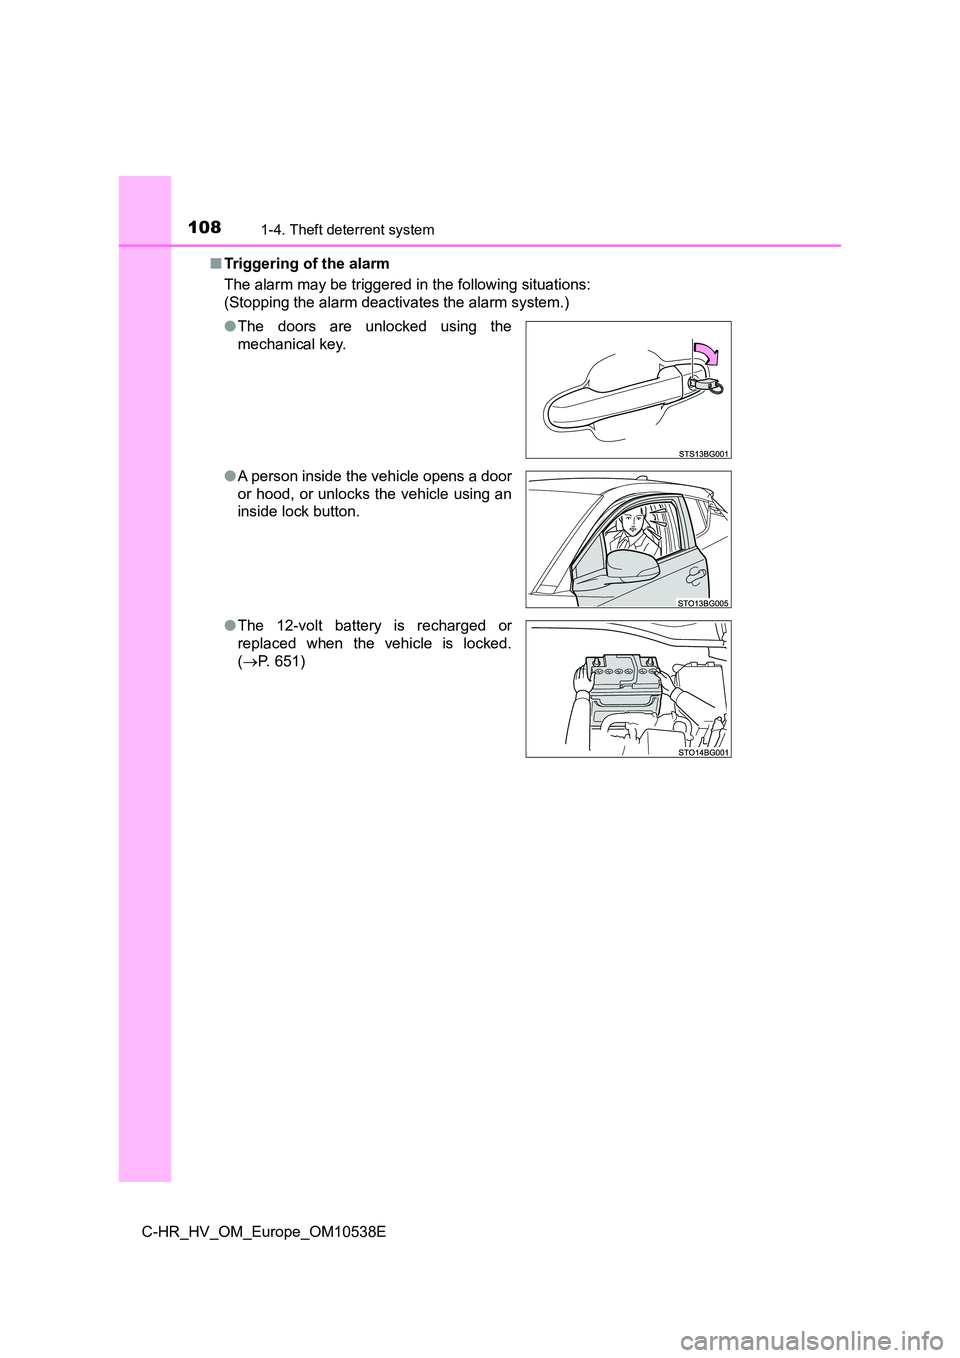 TOYOTA C_HR HYBRID 2017  Owners Manual 1081-4. Theft deterrent system
C-HR_HV_OM_Europe_OM10538E 
■ Triggering of the alarm 
The alarm may be triggered in the following situations: 
(Stopping the alarm deactivates the alarm system.) 
●